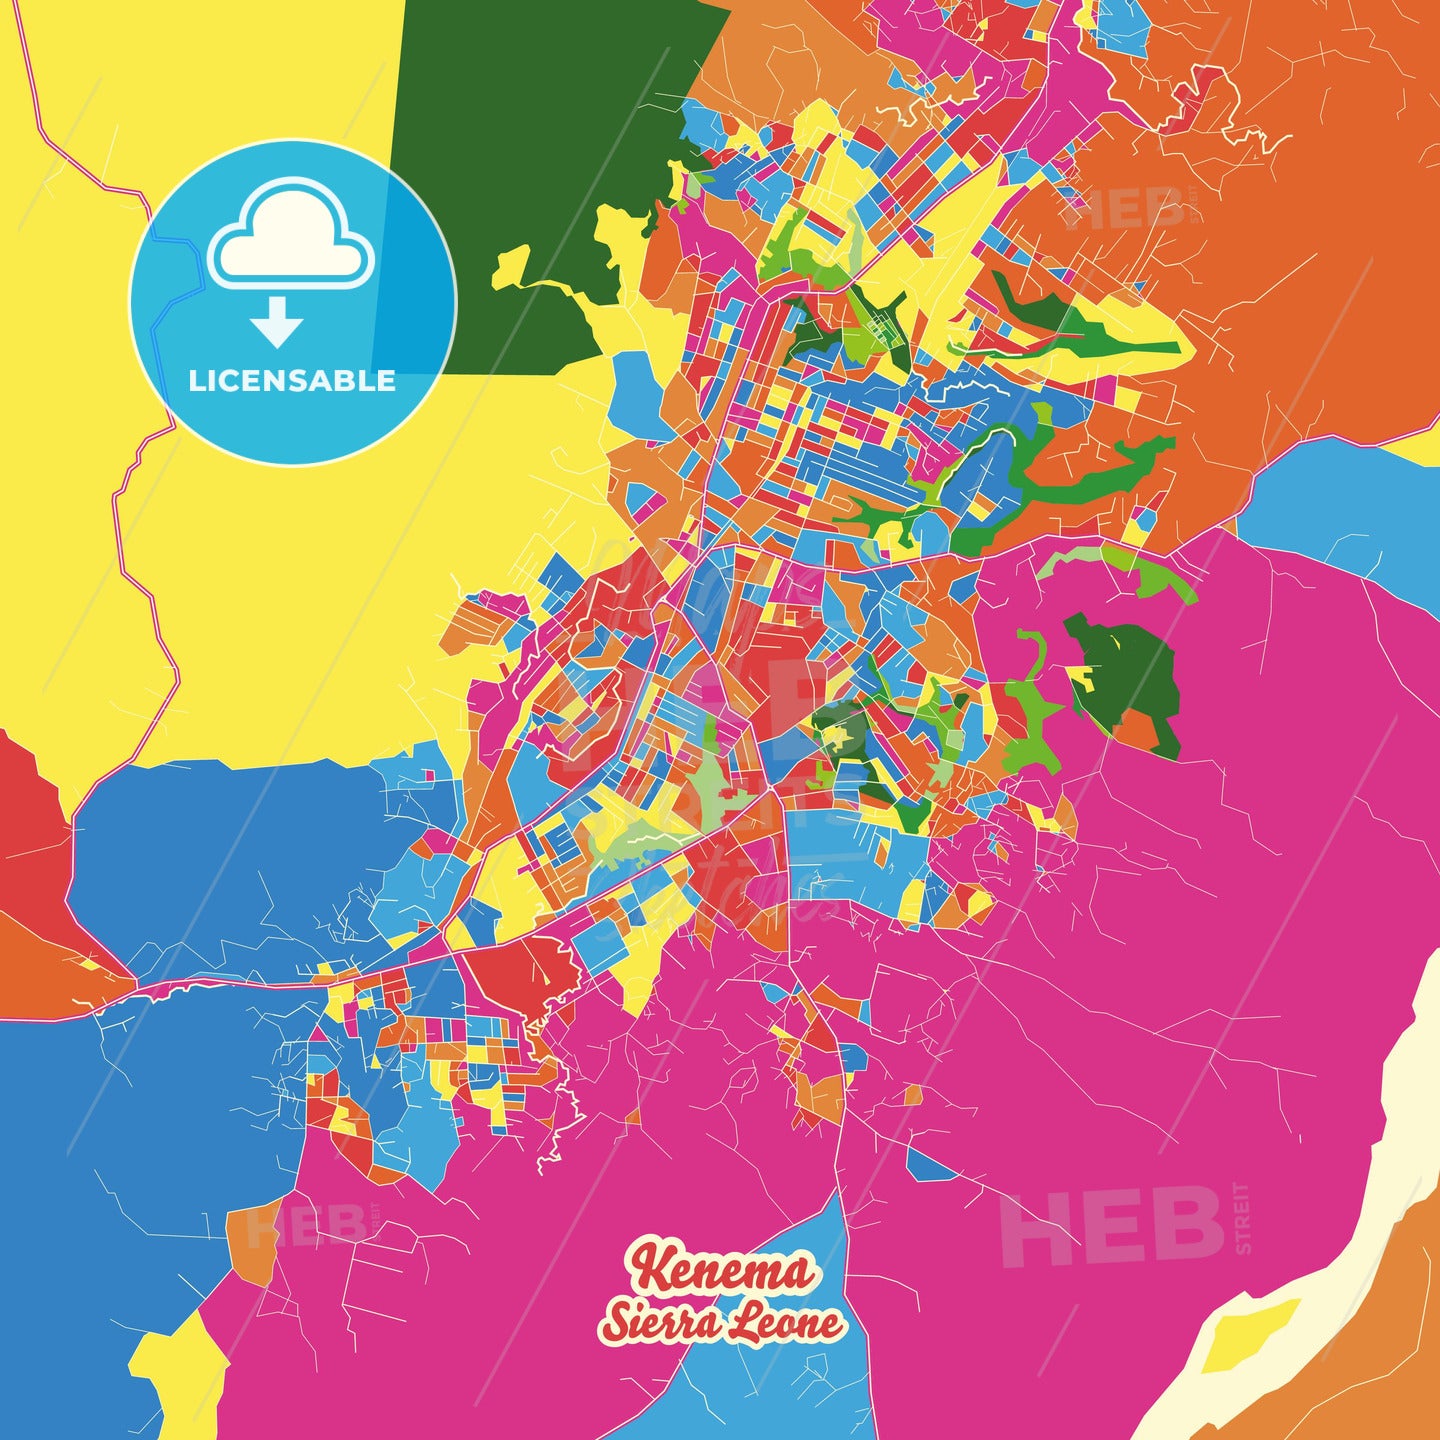 Kenema, Sierra Leone Crazy Colorful Street Map Poster Template - HEBSTREITS Sketches